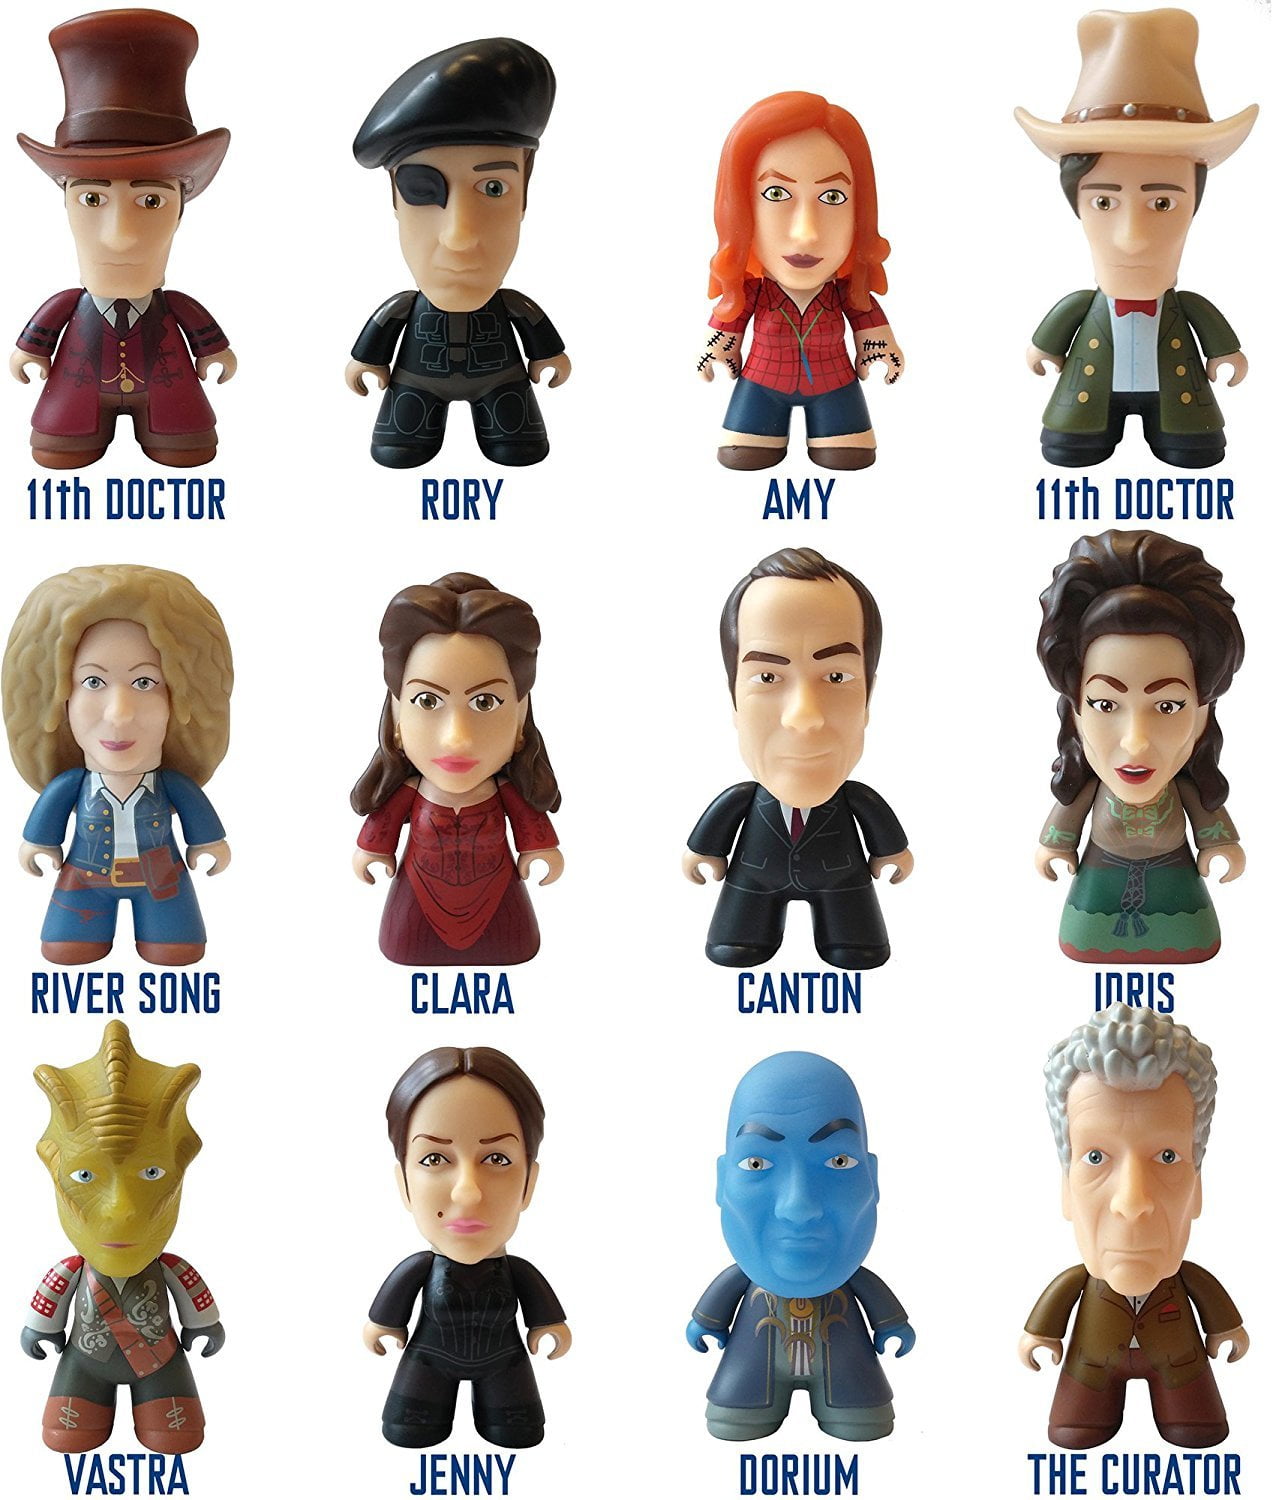 Doctor Who Titans 11th "Good Man" Vinyl Figures 11th Doctor Red 2/20 